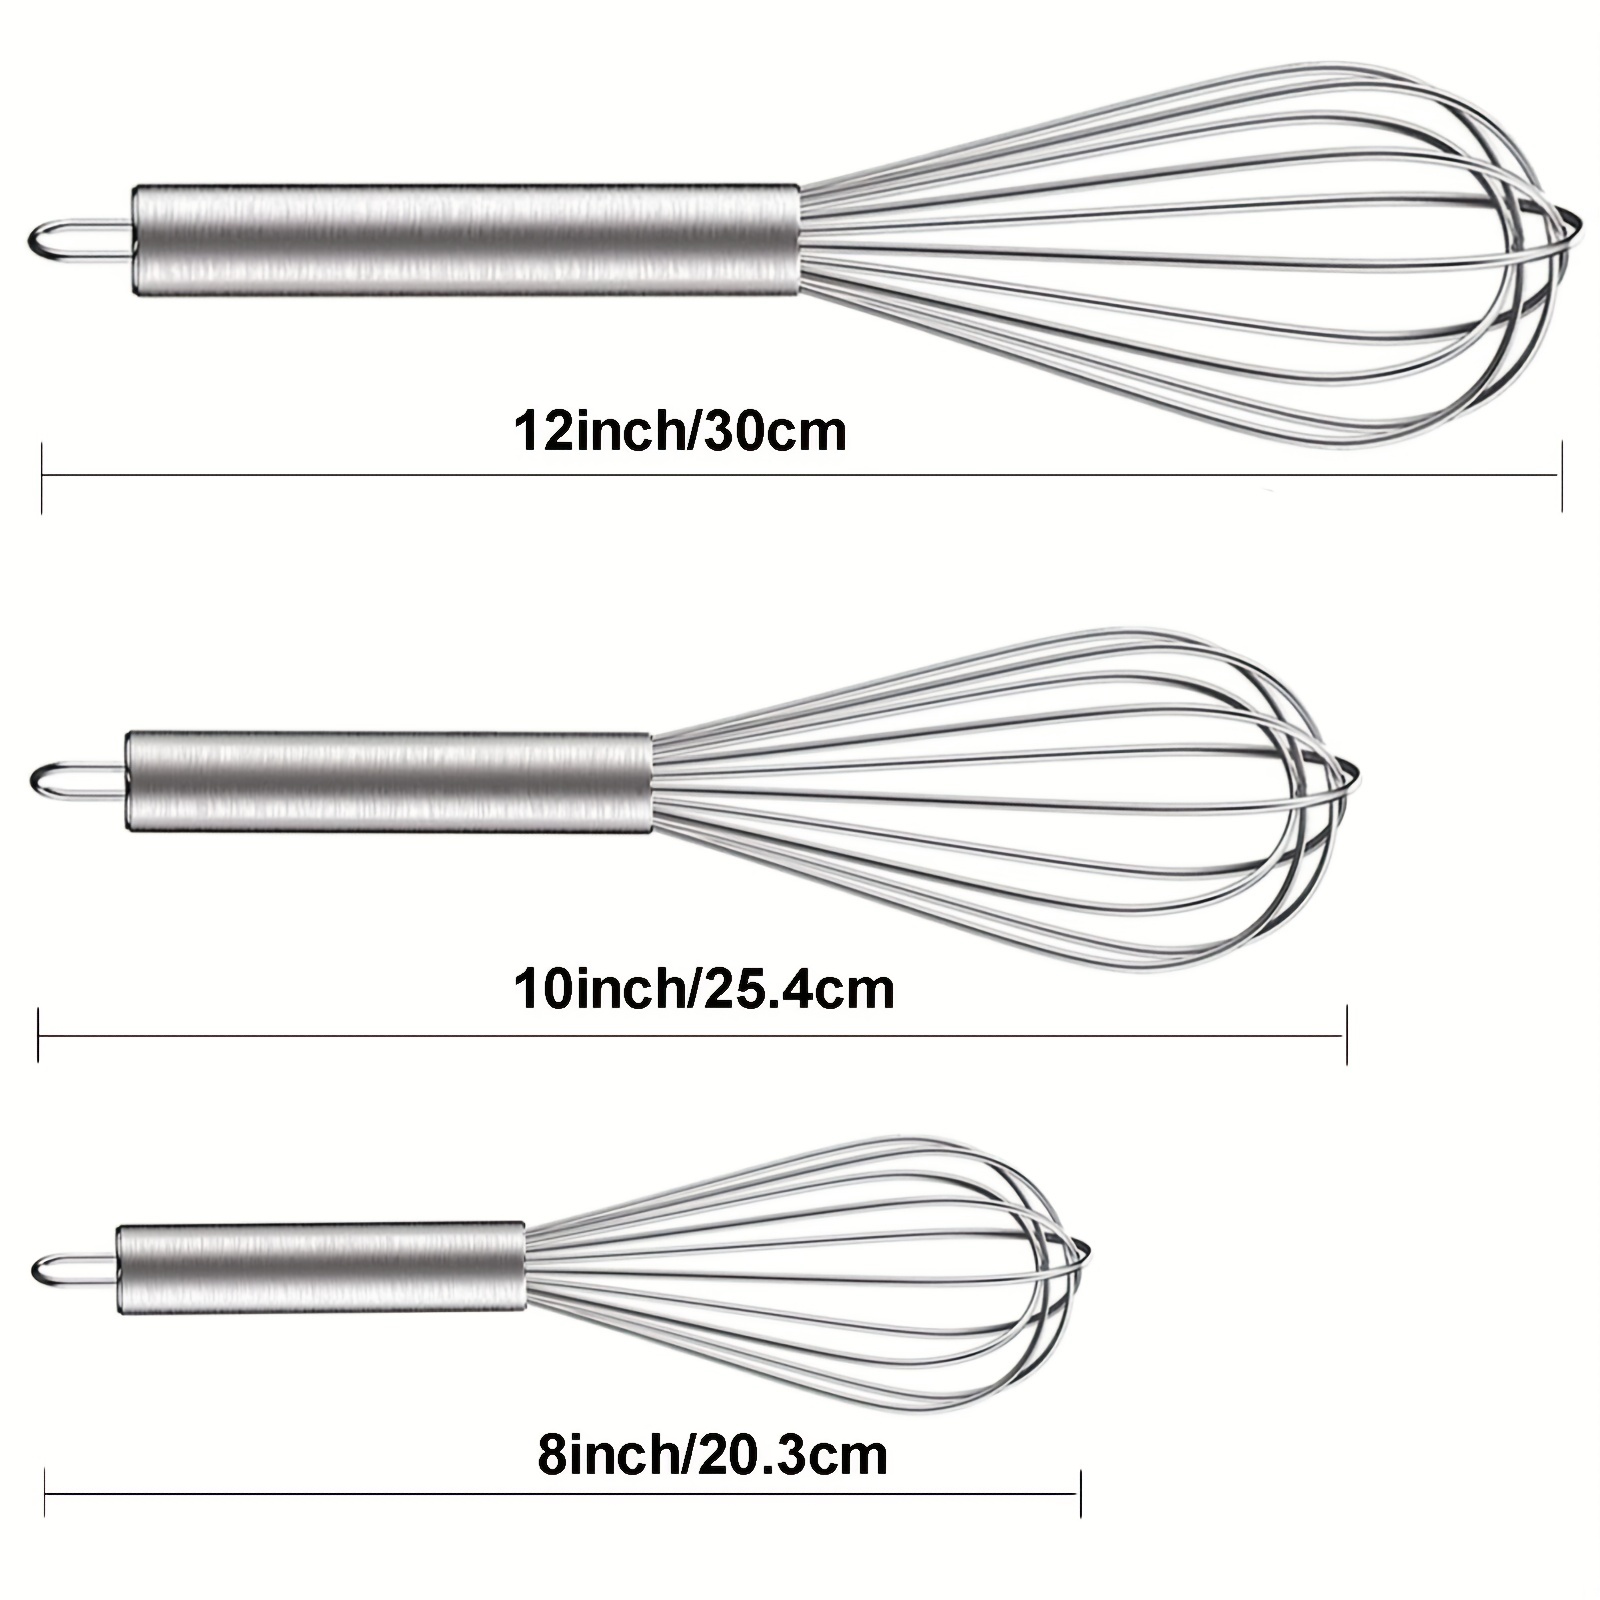  Whisks for Cooking, Stainless Steel Balloon Wire Whisk for  Blending, Whisking, Beating, Stirring, Kitchen Wisks 8 inch: Home & Kitchen